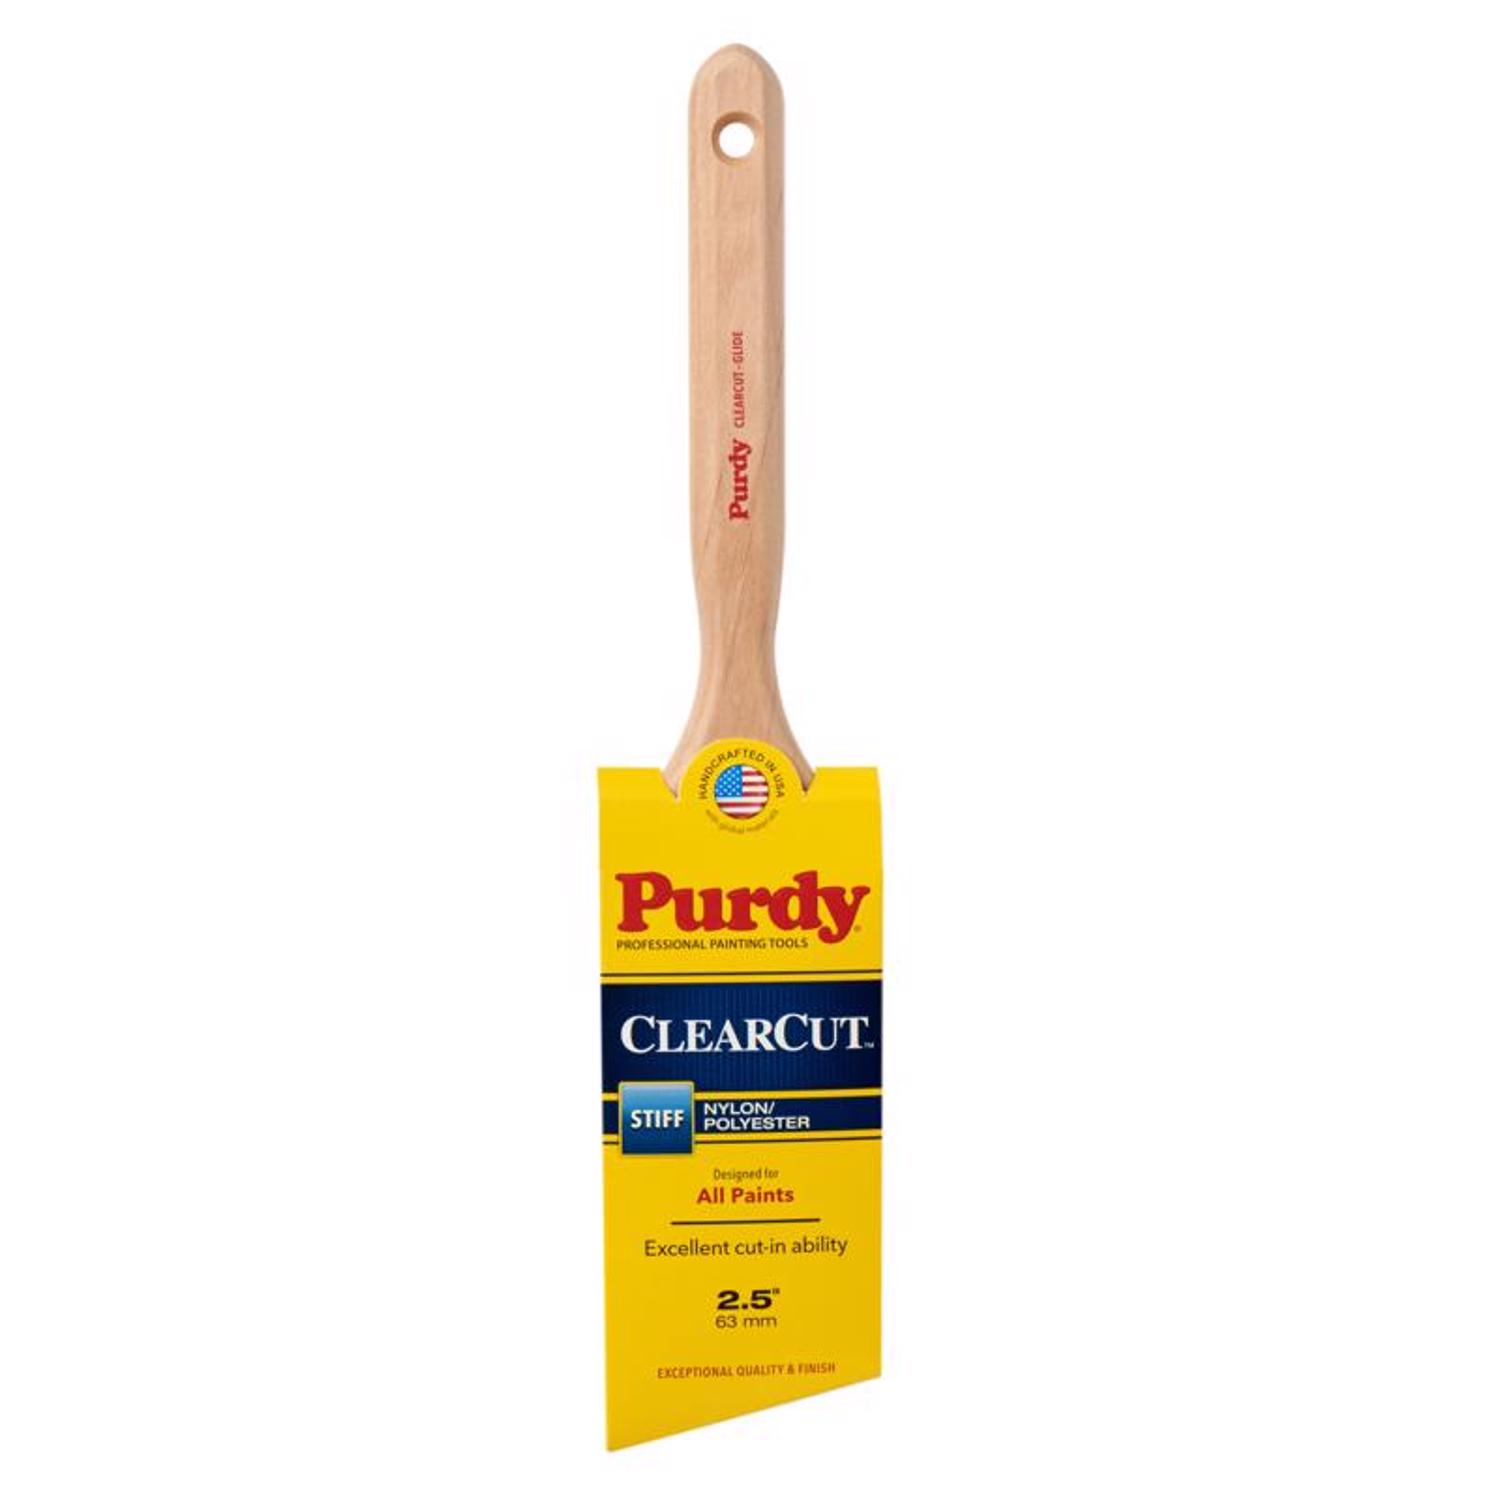 Photos - Putty Knife / Painting Tool Purdy Clearcut Glide 2-1/2 in. Stiff Angle Trim Paint Brush 144152125